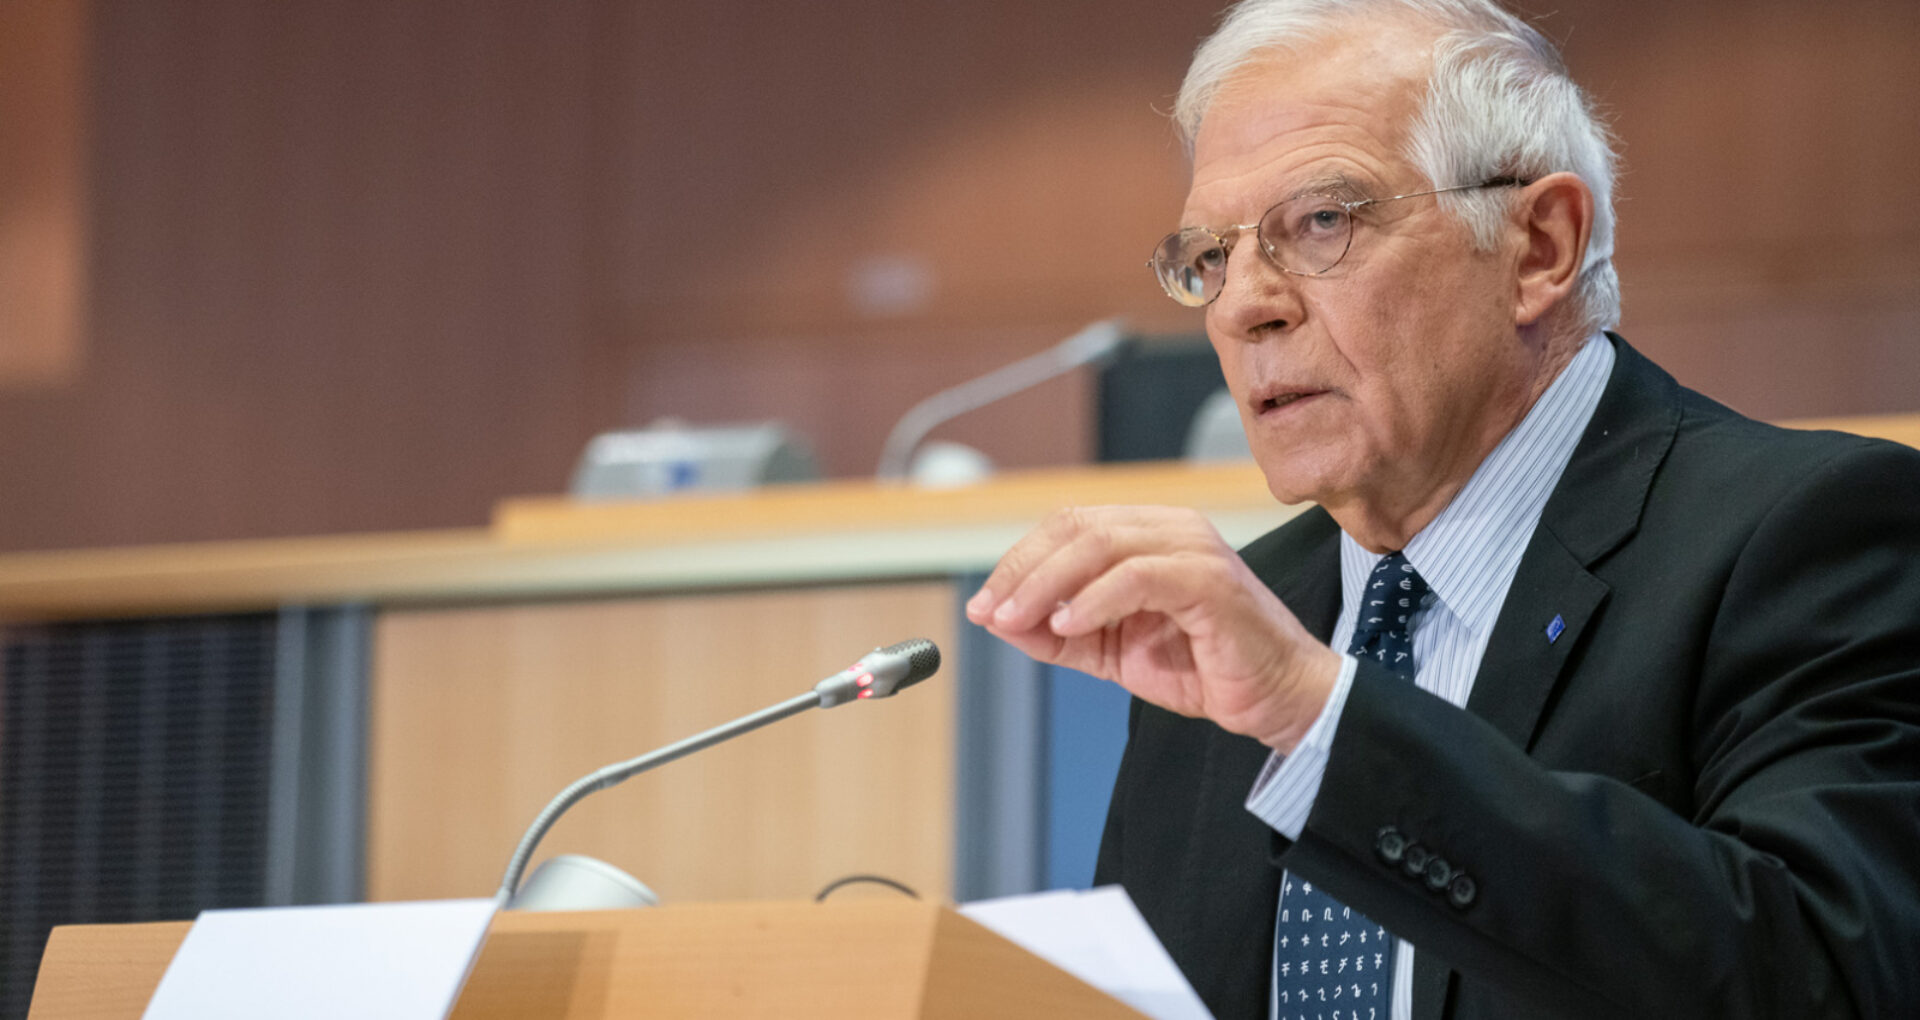 Remarks by High Representative/Vice-President Josep Borrell Following the Meeting with Foreign Ministers of Georgia, Moldova, and Ukraine